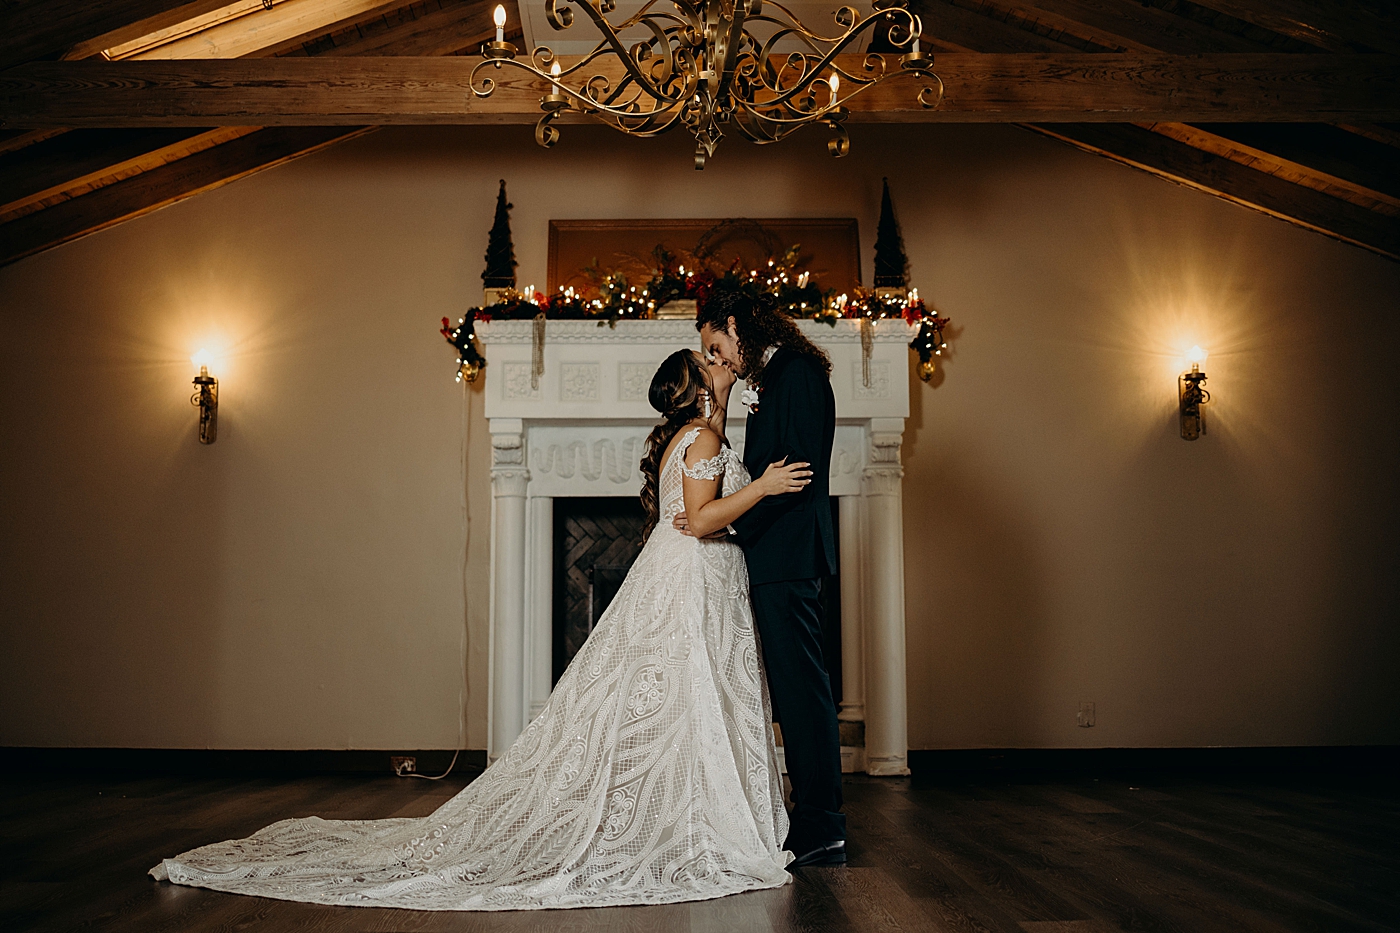 Bride and Groom kissing inside in front of fireplace with Christmas decor Benvenuto Restaurant Wedding Photography captured by South Florida Wedding Photographer Maggie Alvarez Photography